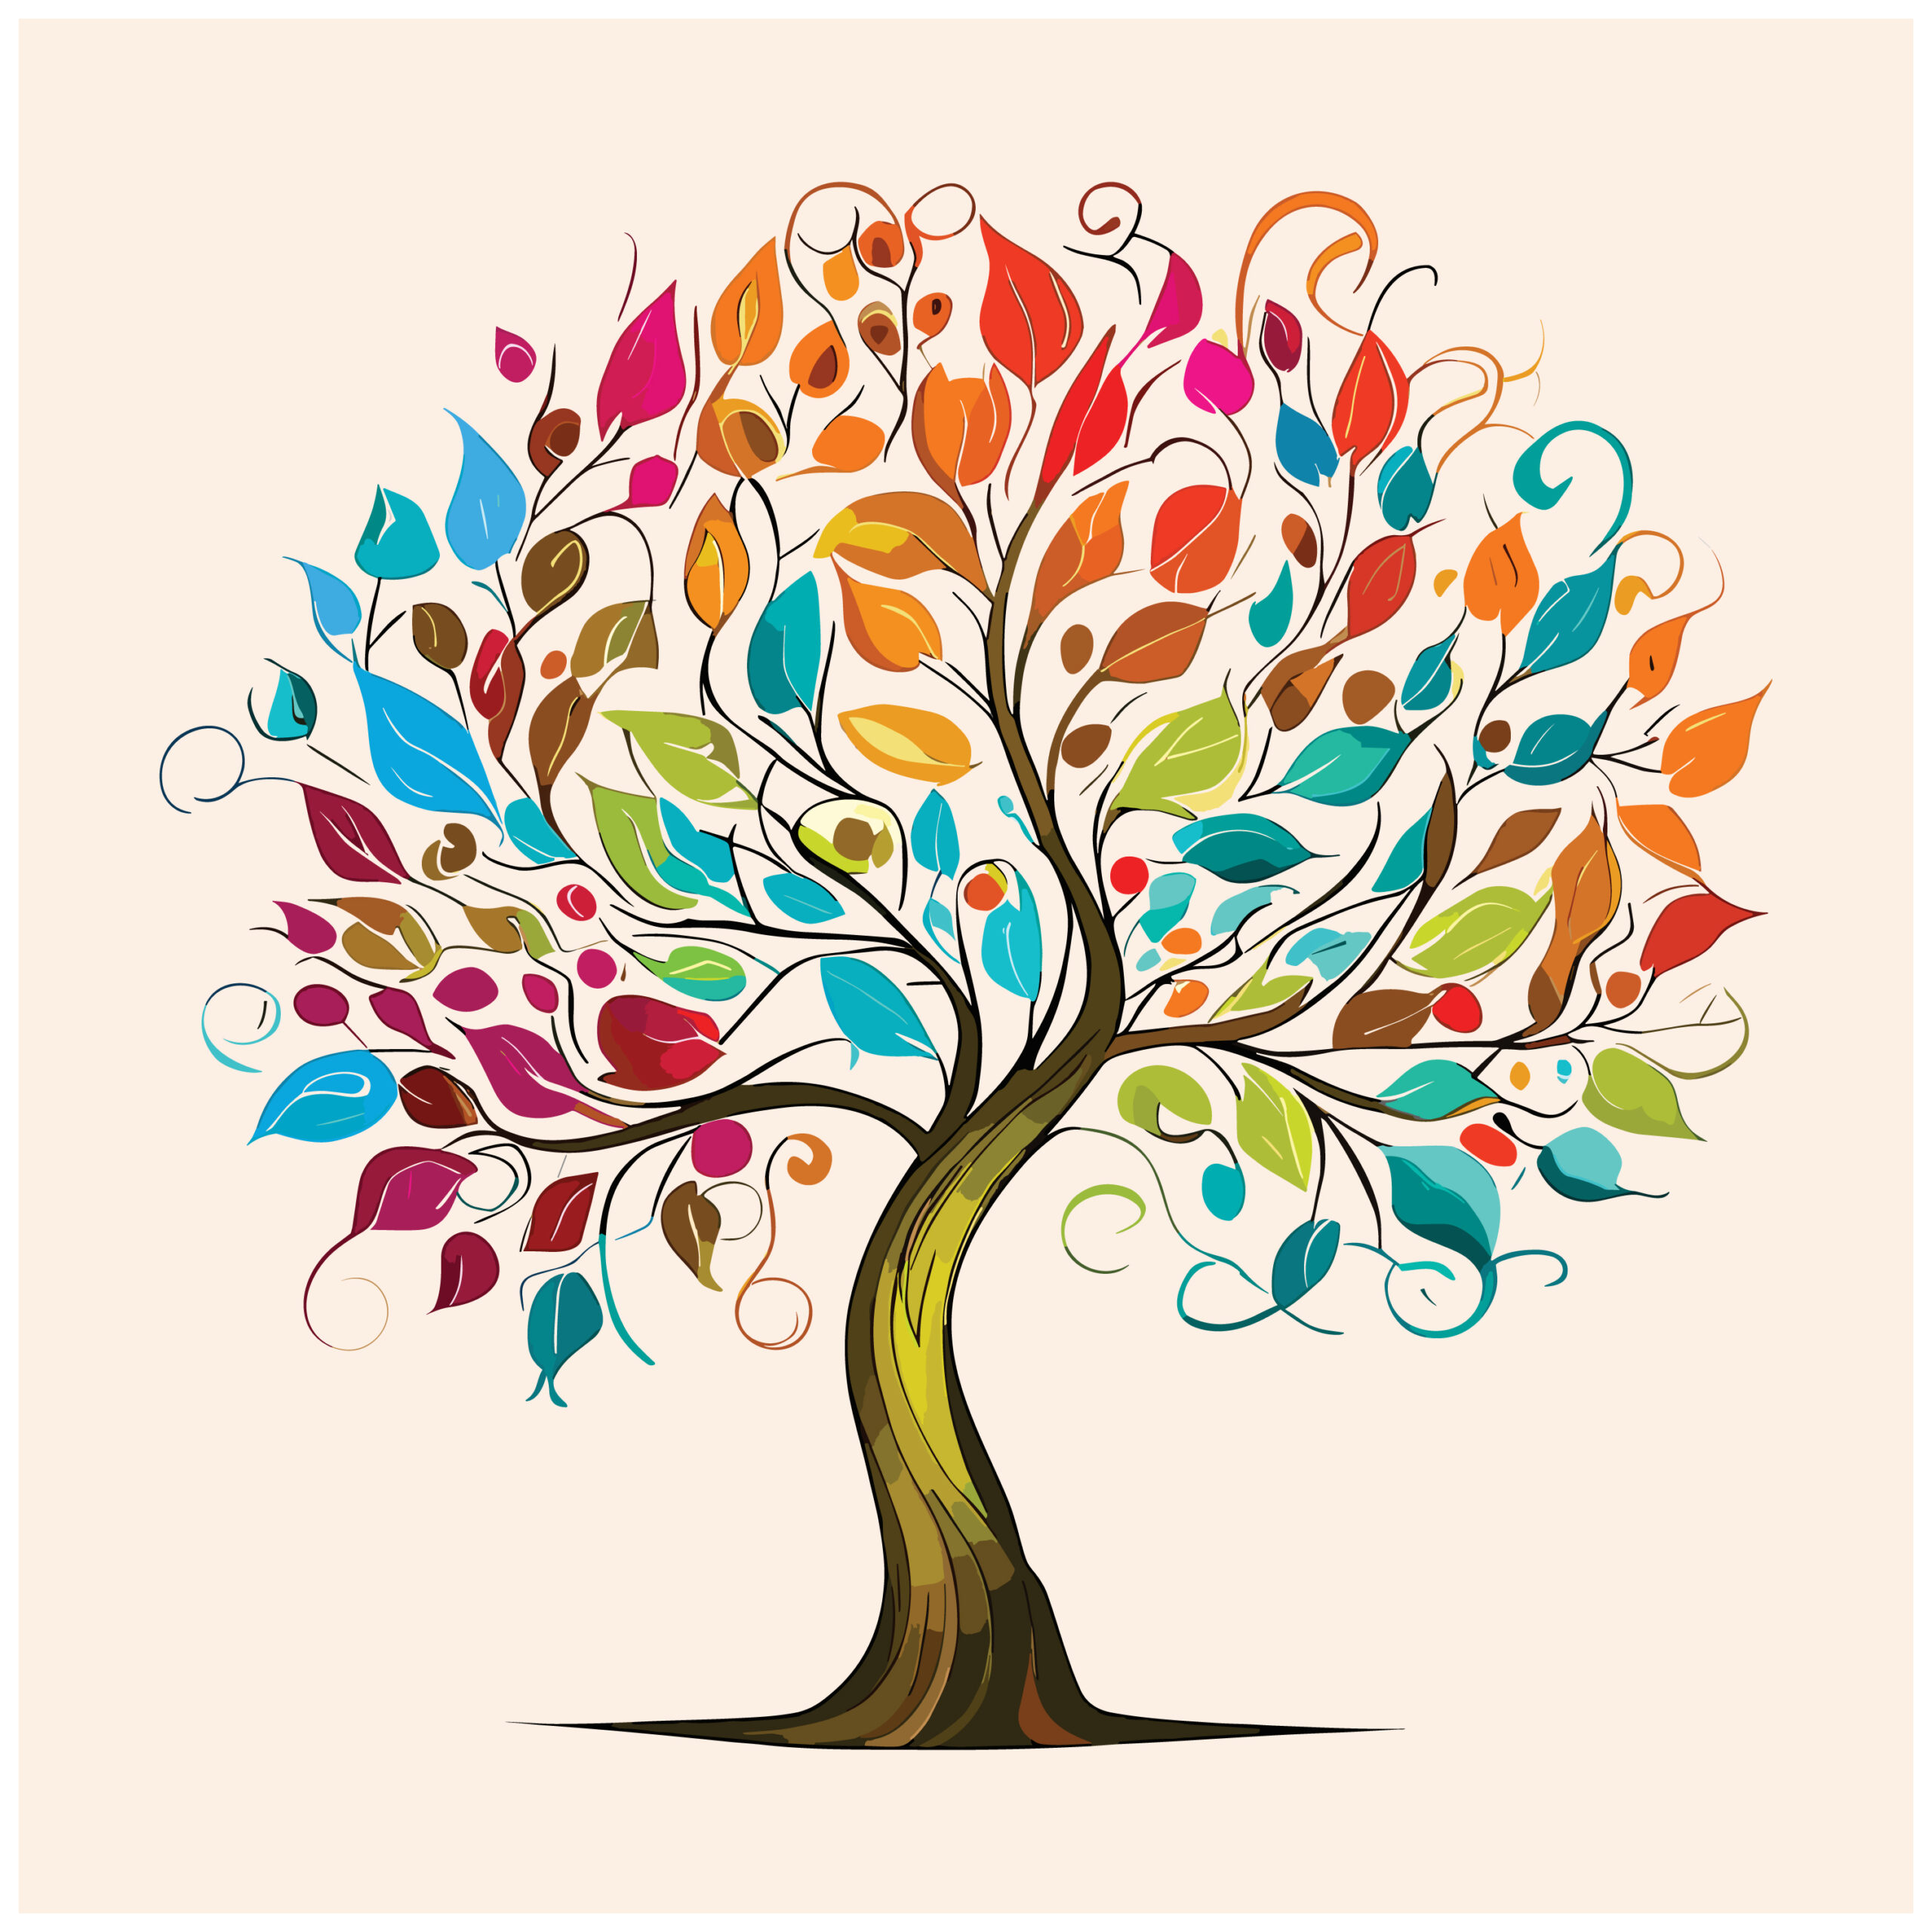 10_elegant_colorful_tree_with_vibrant_leaves_hanging_branches_illustration